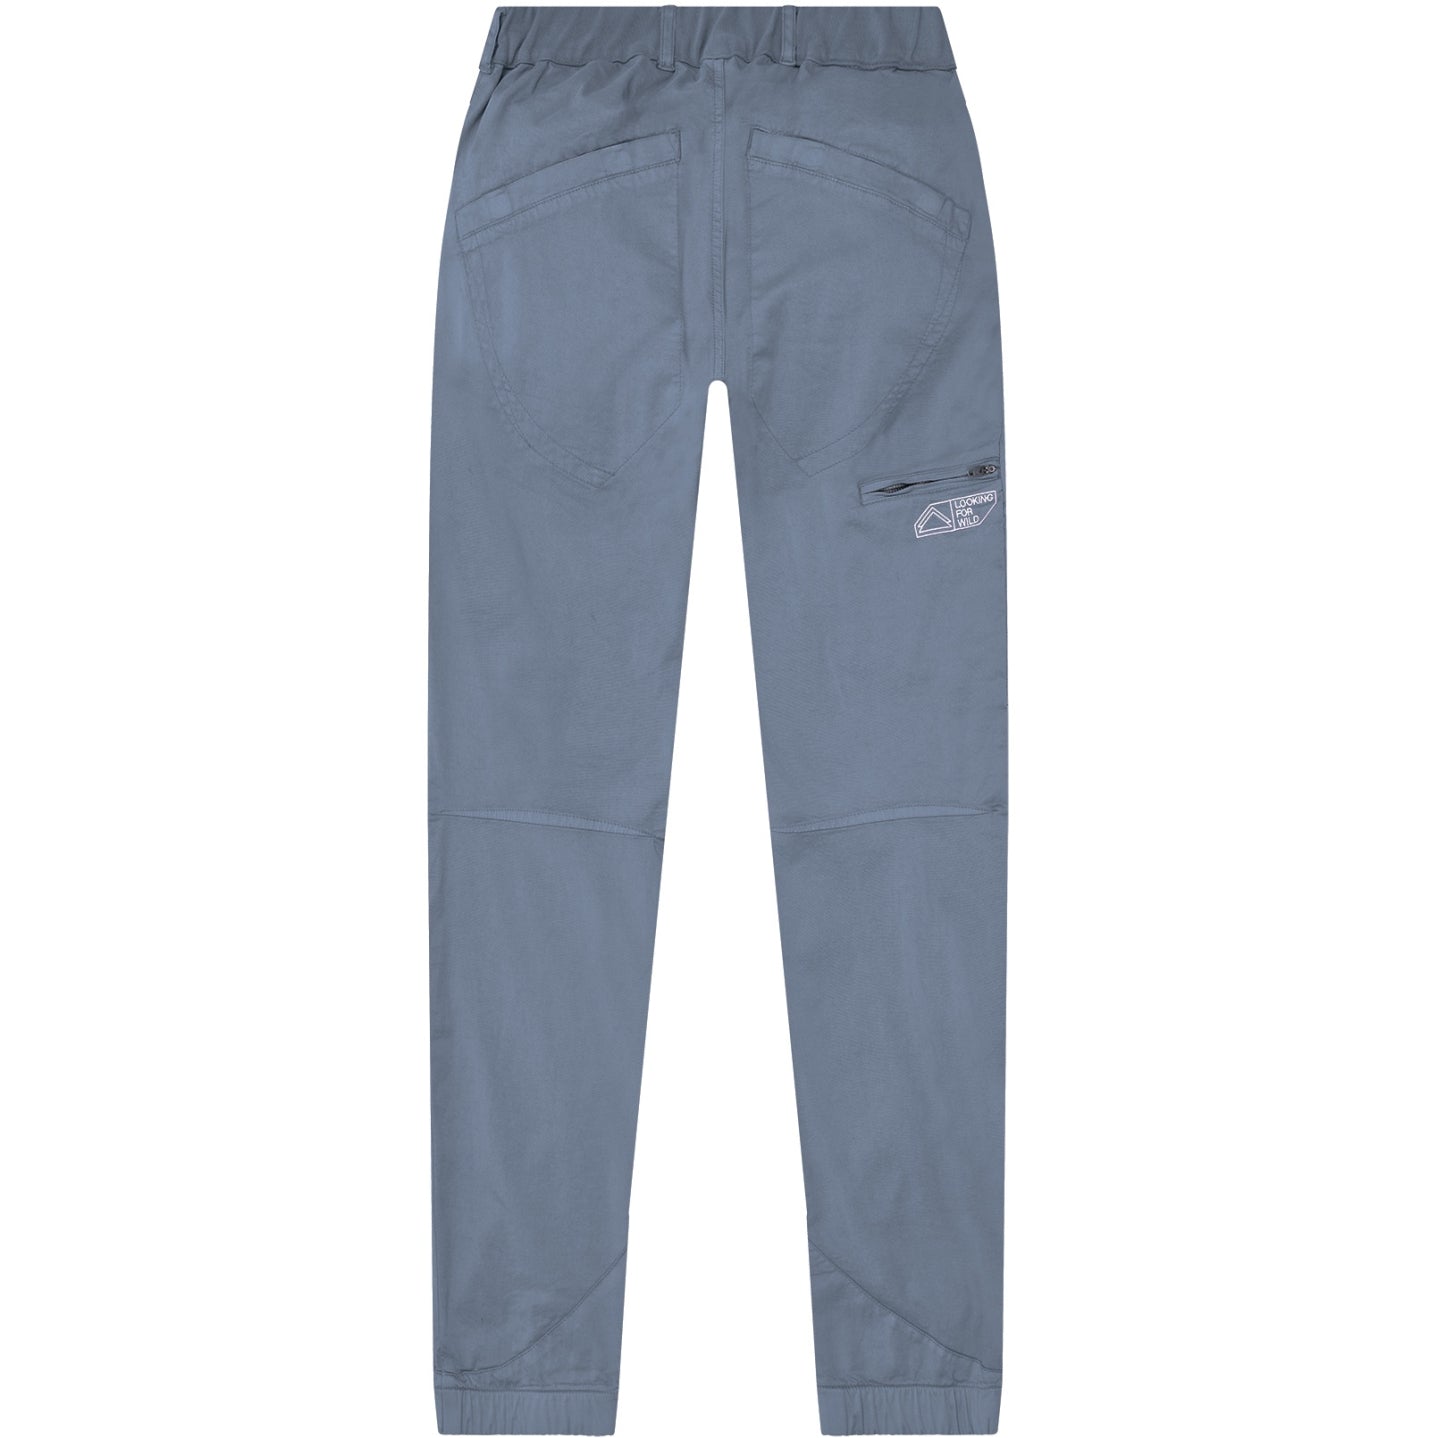 Looking For Wild - Fitz Roy Pant - Flint Stone